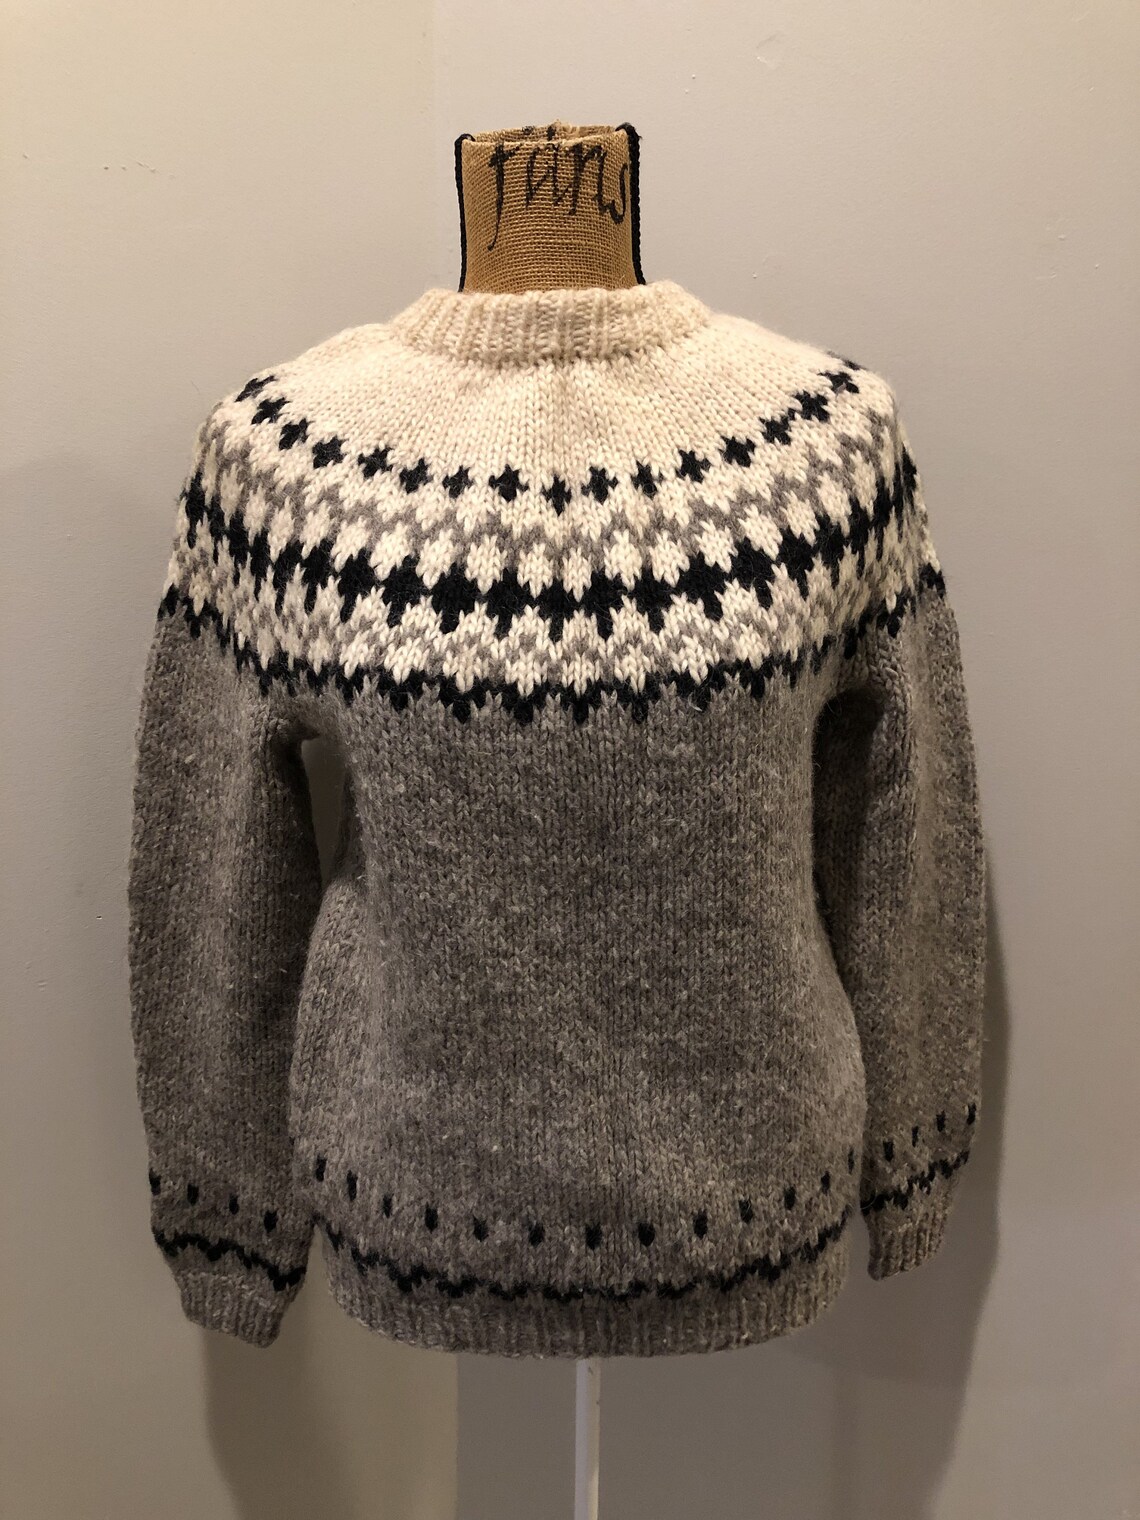 Hand Knit Wool Lopi Sweater Made in Canada | Etsy